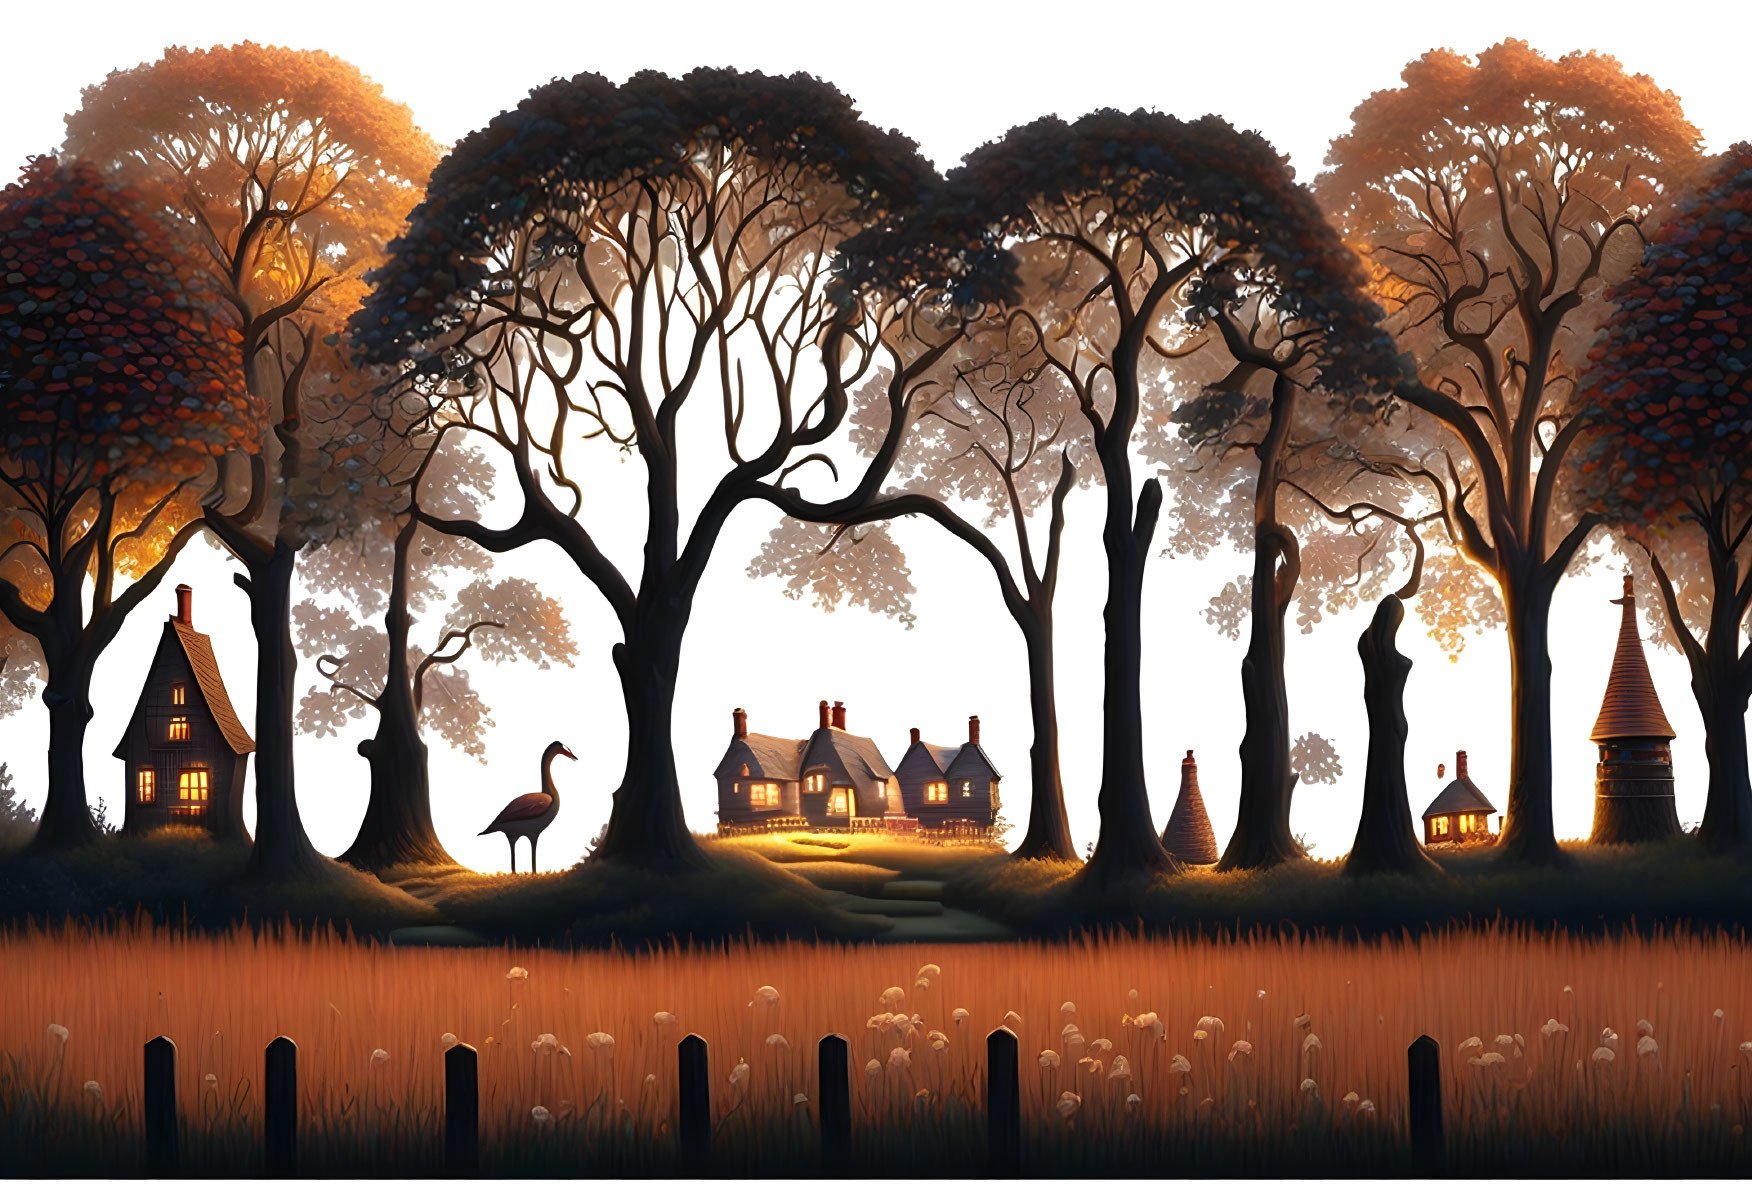 Enchanting forest dusk scene with heart-shaped trees, stork, cottages, and soft glow